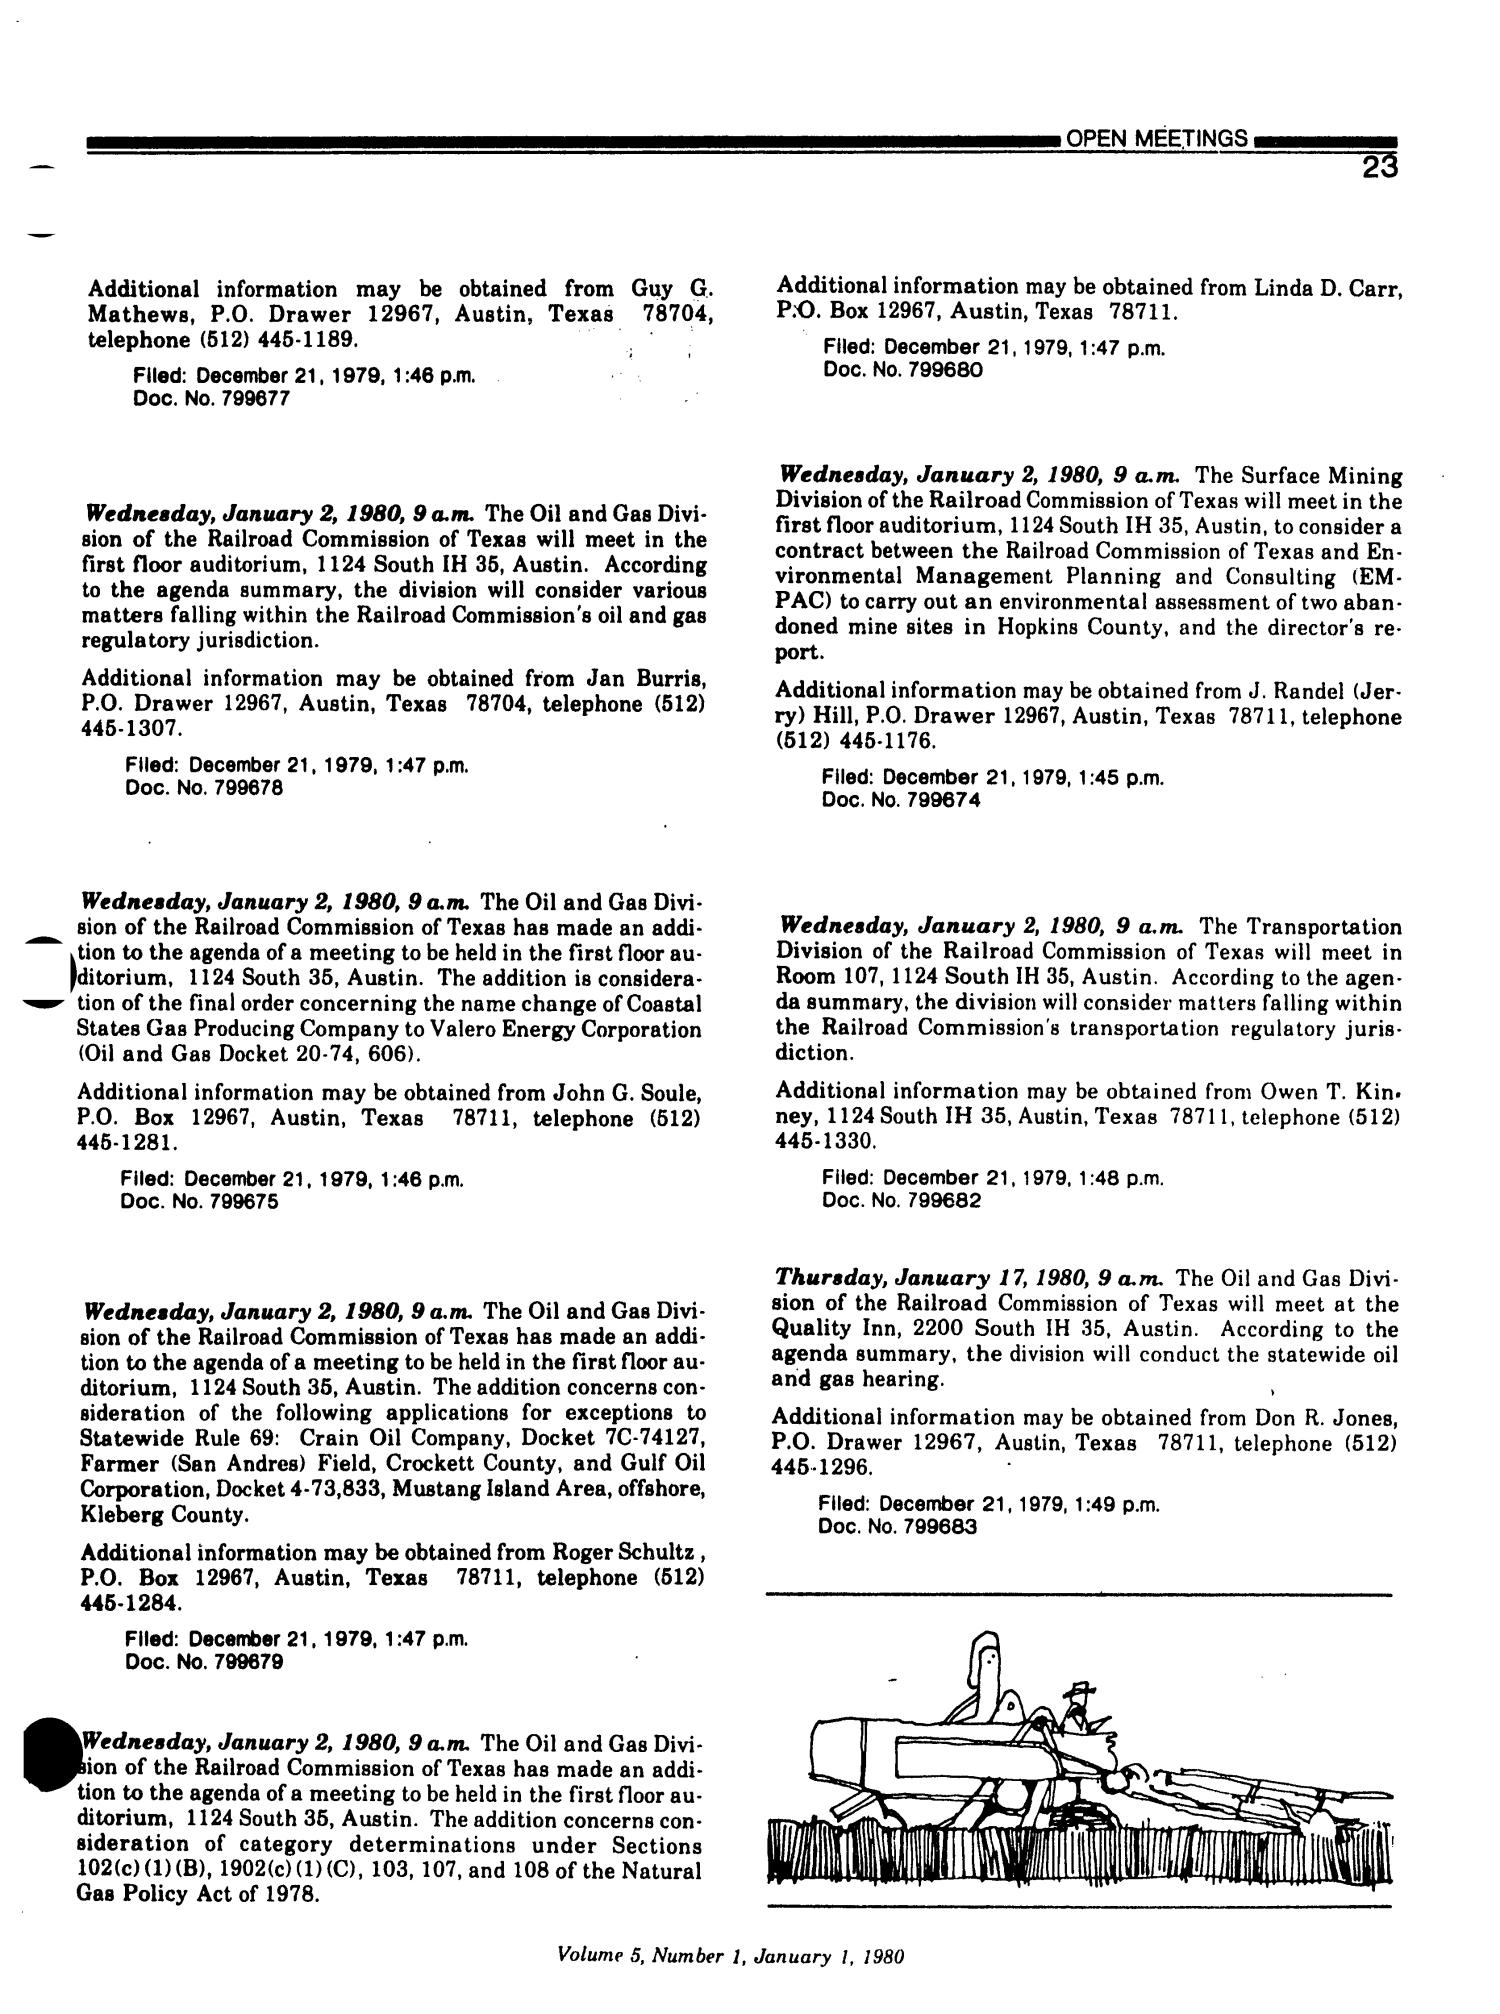 Texas Register, Volume 5, Number 1, Pages 1-30, January 1, 1980
                                                
                                                    23
                                                